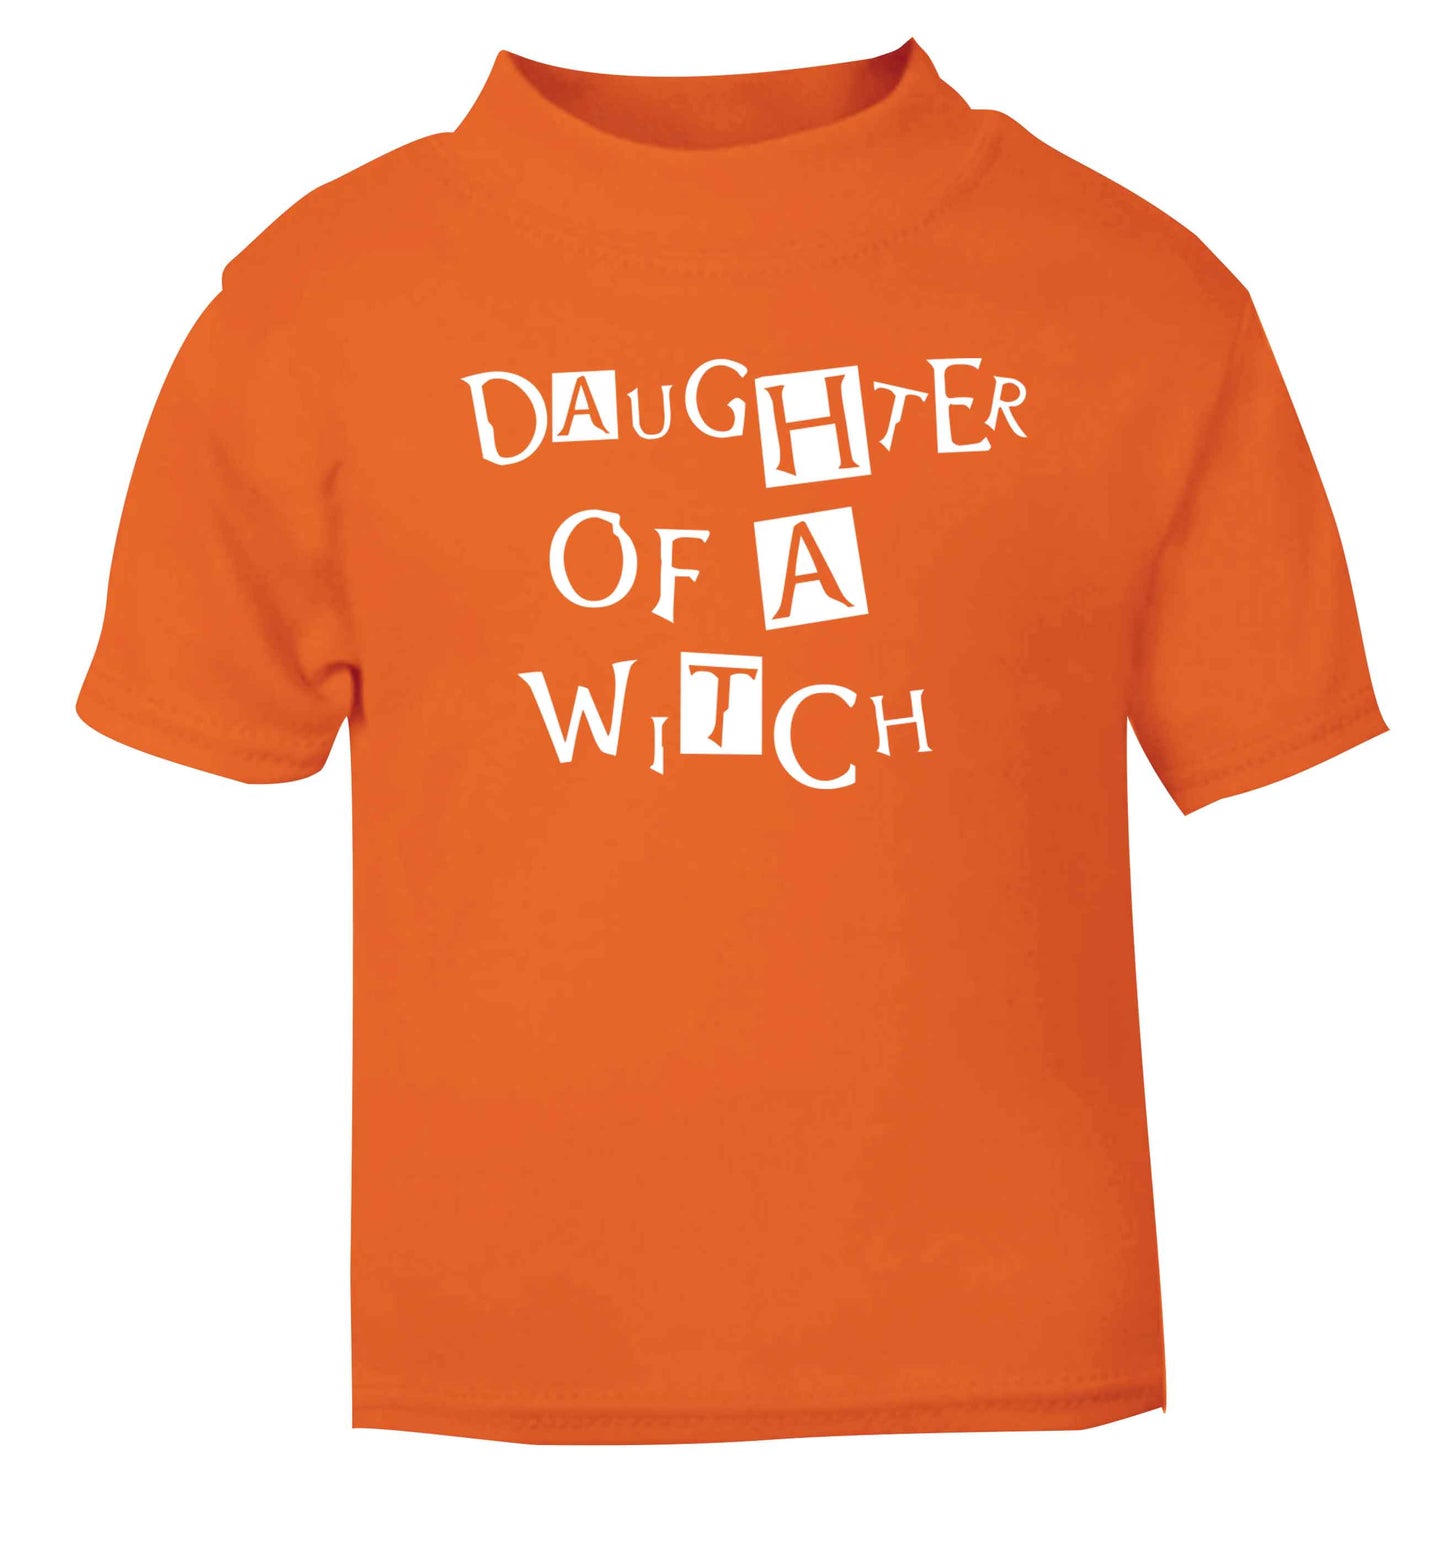 Daughter of a witch orange baby toddler Tshirt 2 Years